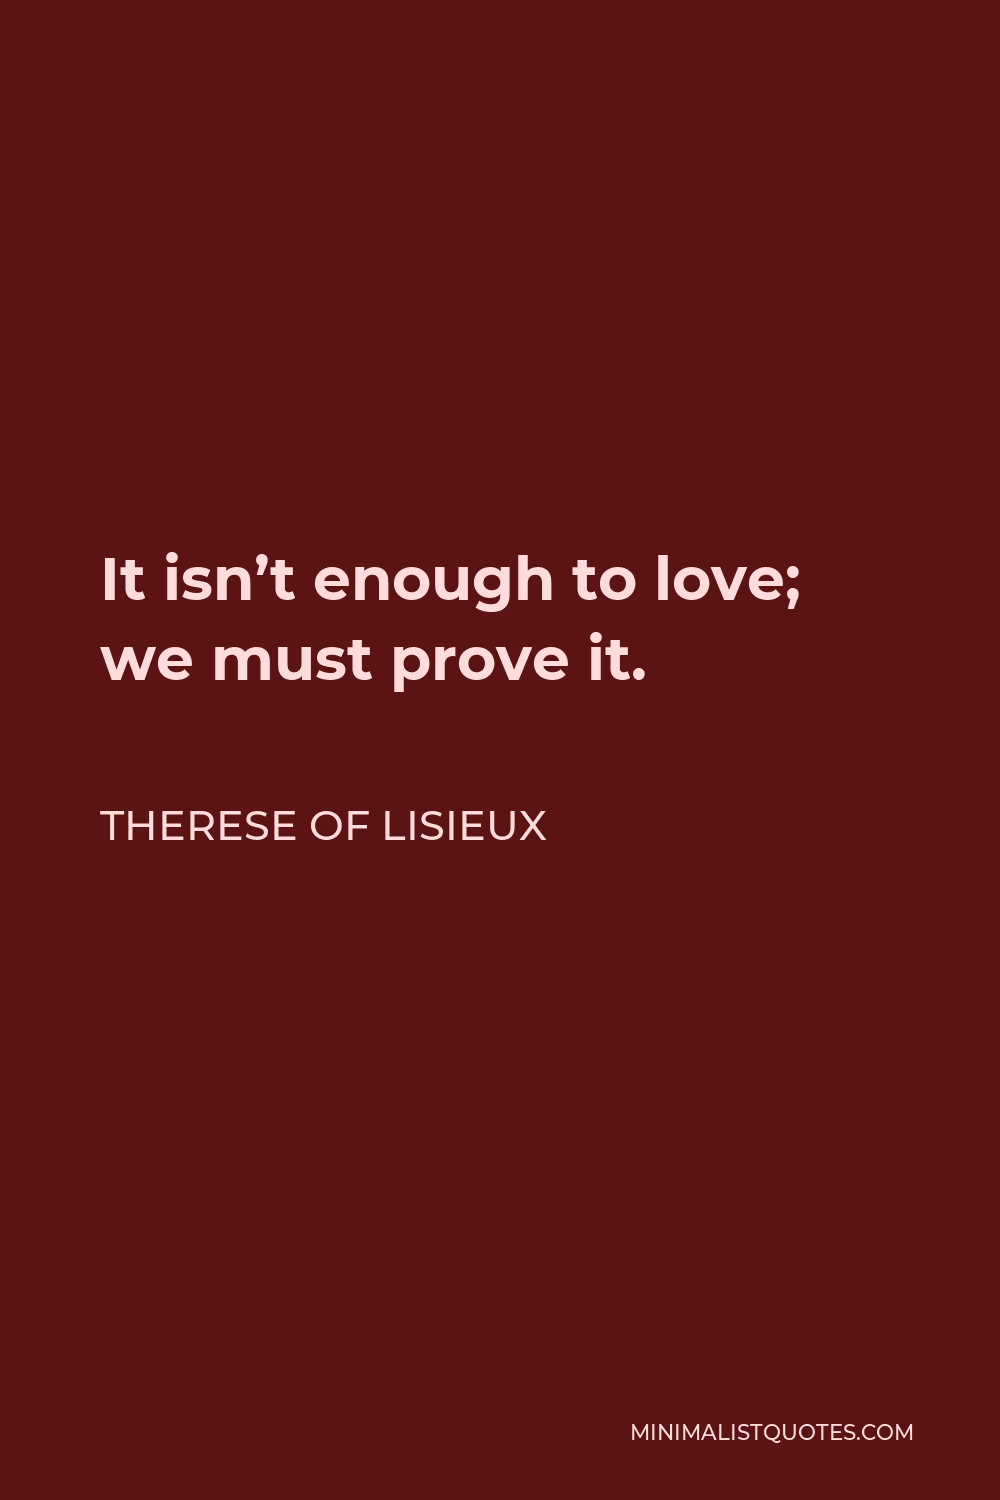 Therese of Lisieux Quote - It isn’t enough to love; we must prove it.